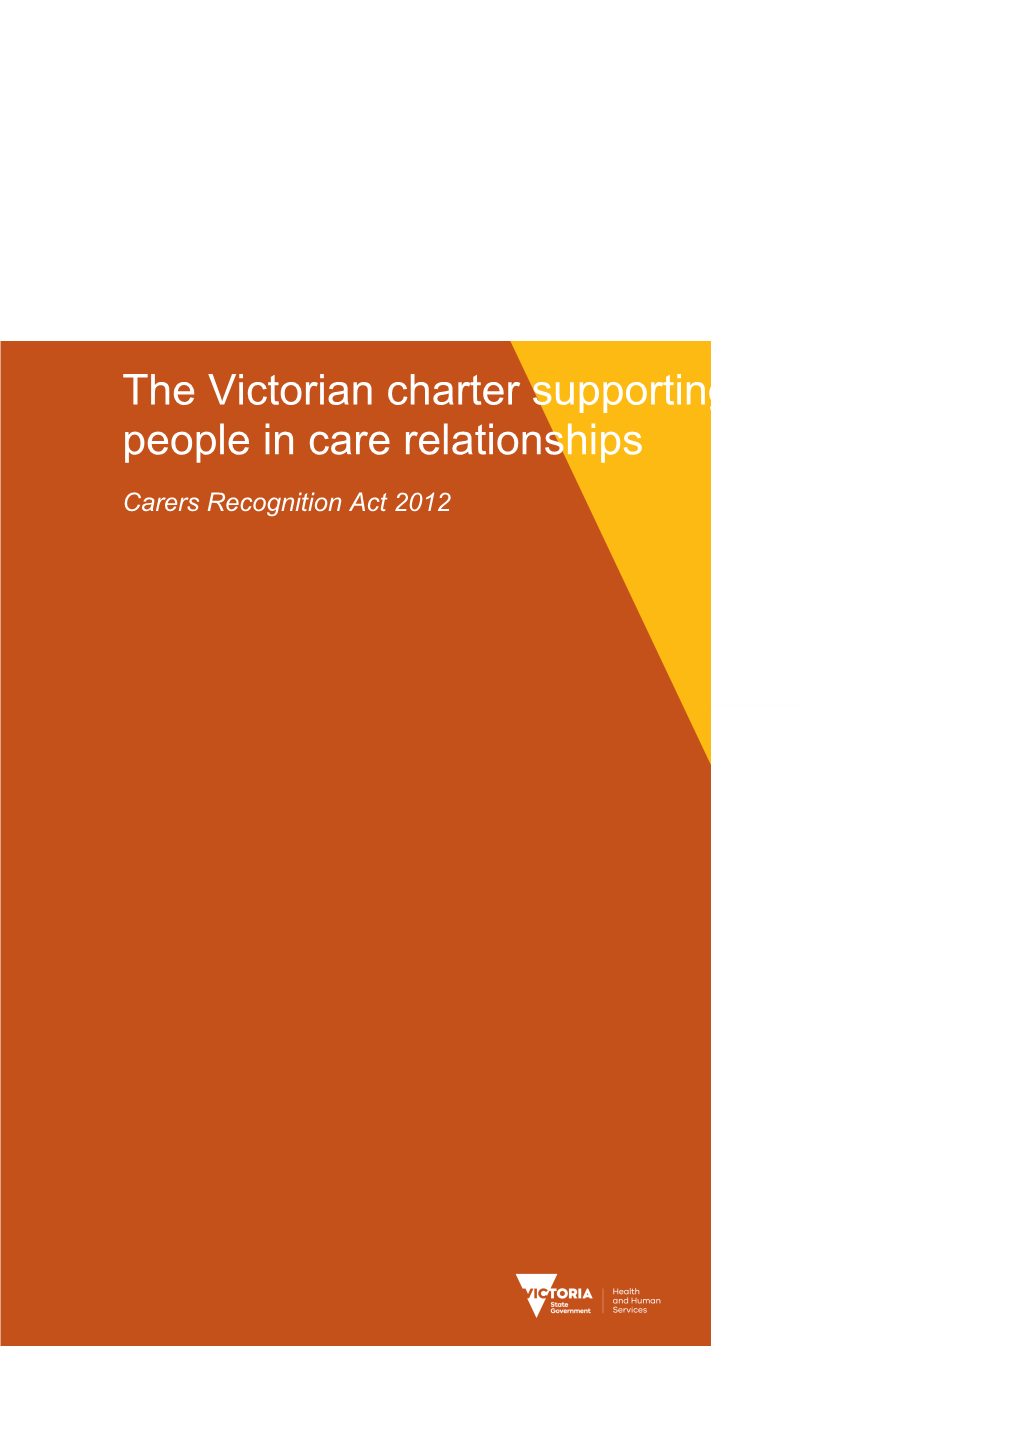 Carers Recognition Act the Victorian Charter Supporting People in Care Relationships